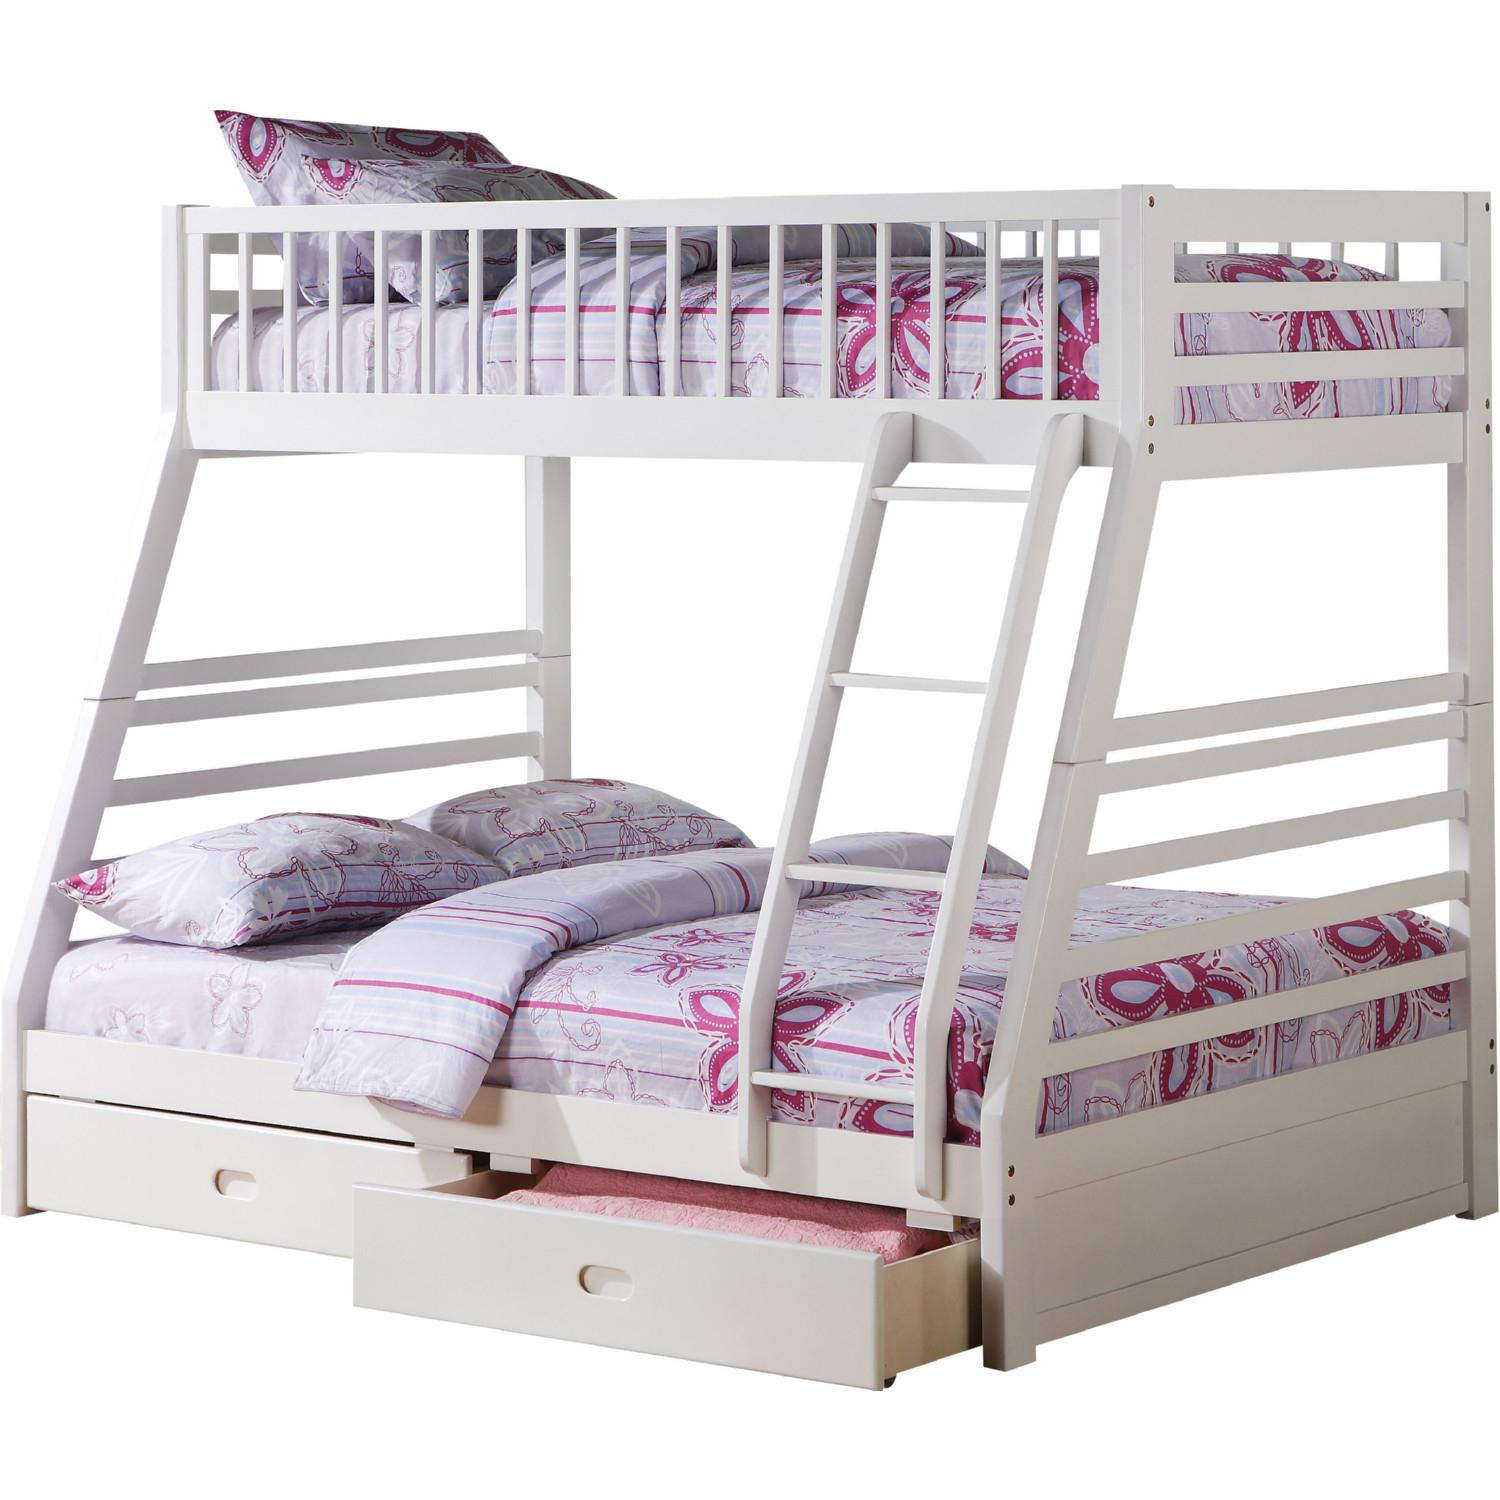 Transitional Twin/Full Bunk Bed Jason 37040 in White 